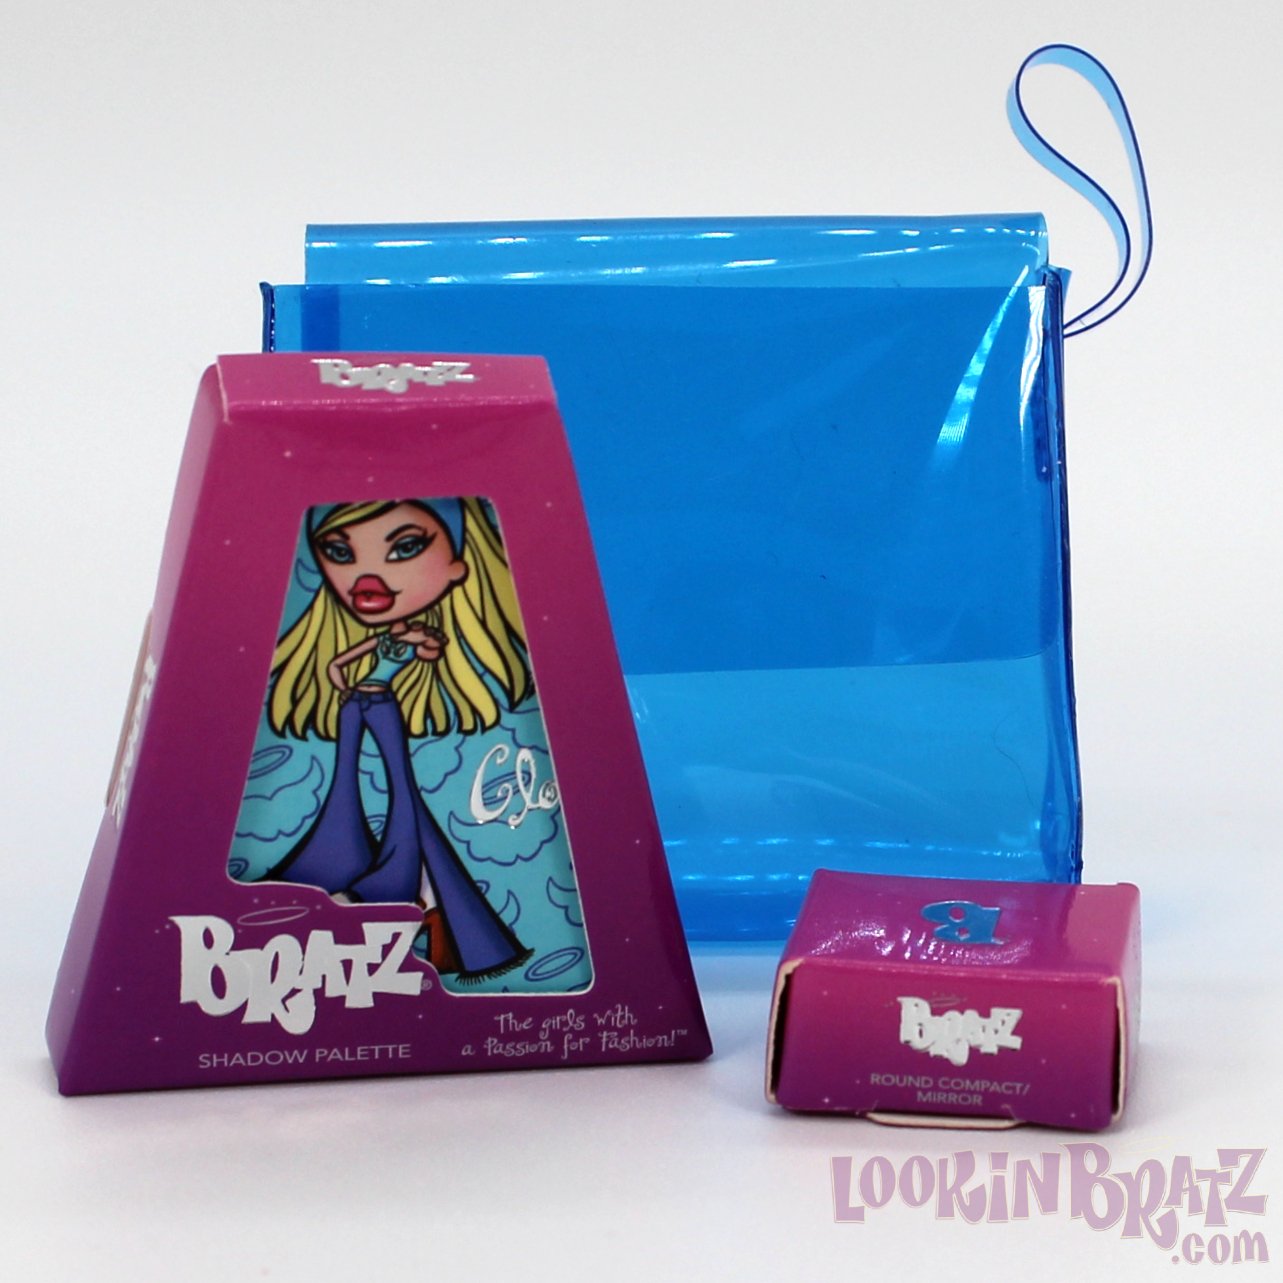 Mini Bratz Cosmetics First Edition Cloe Shadow Palette and Round Compact Mirror (Packaging)